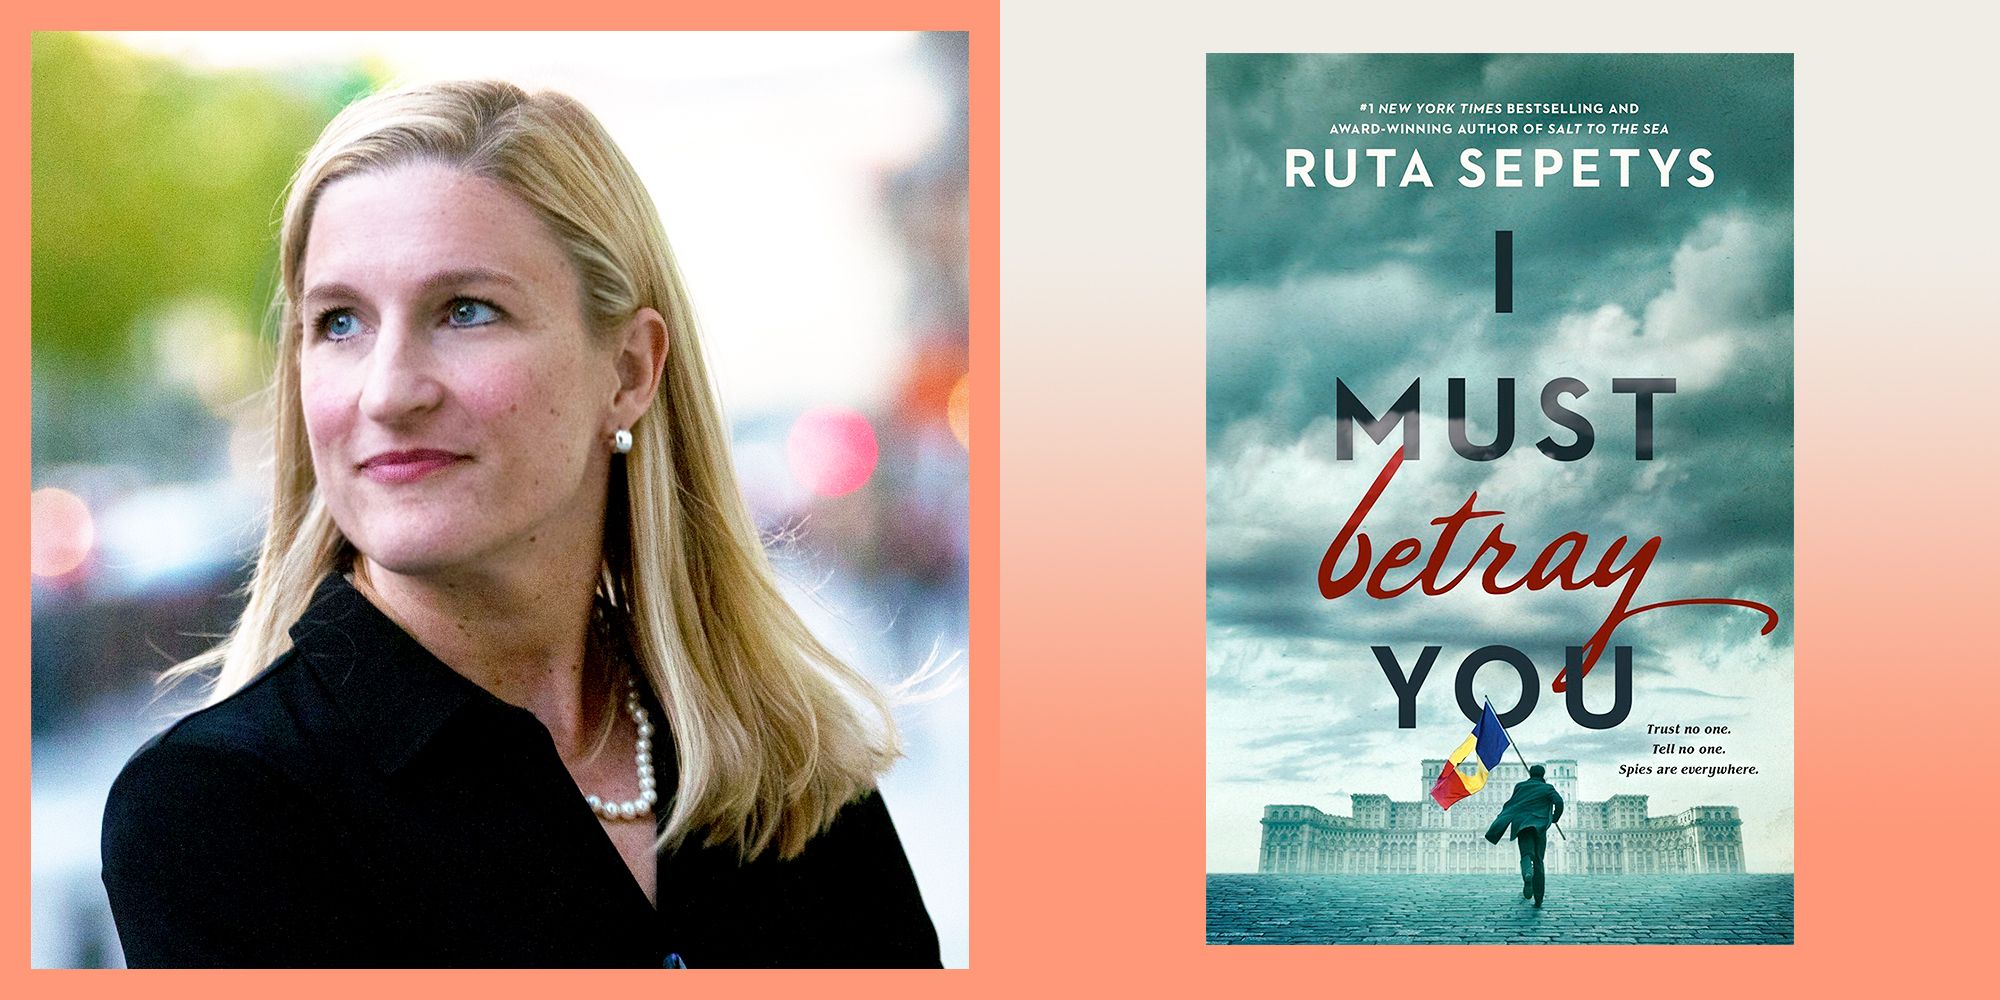 i must betray you by ruta sepetys